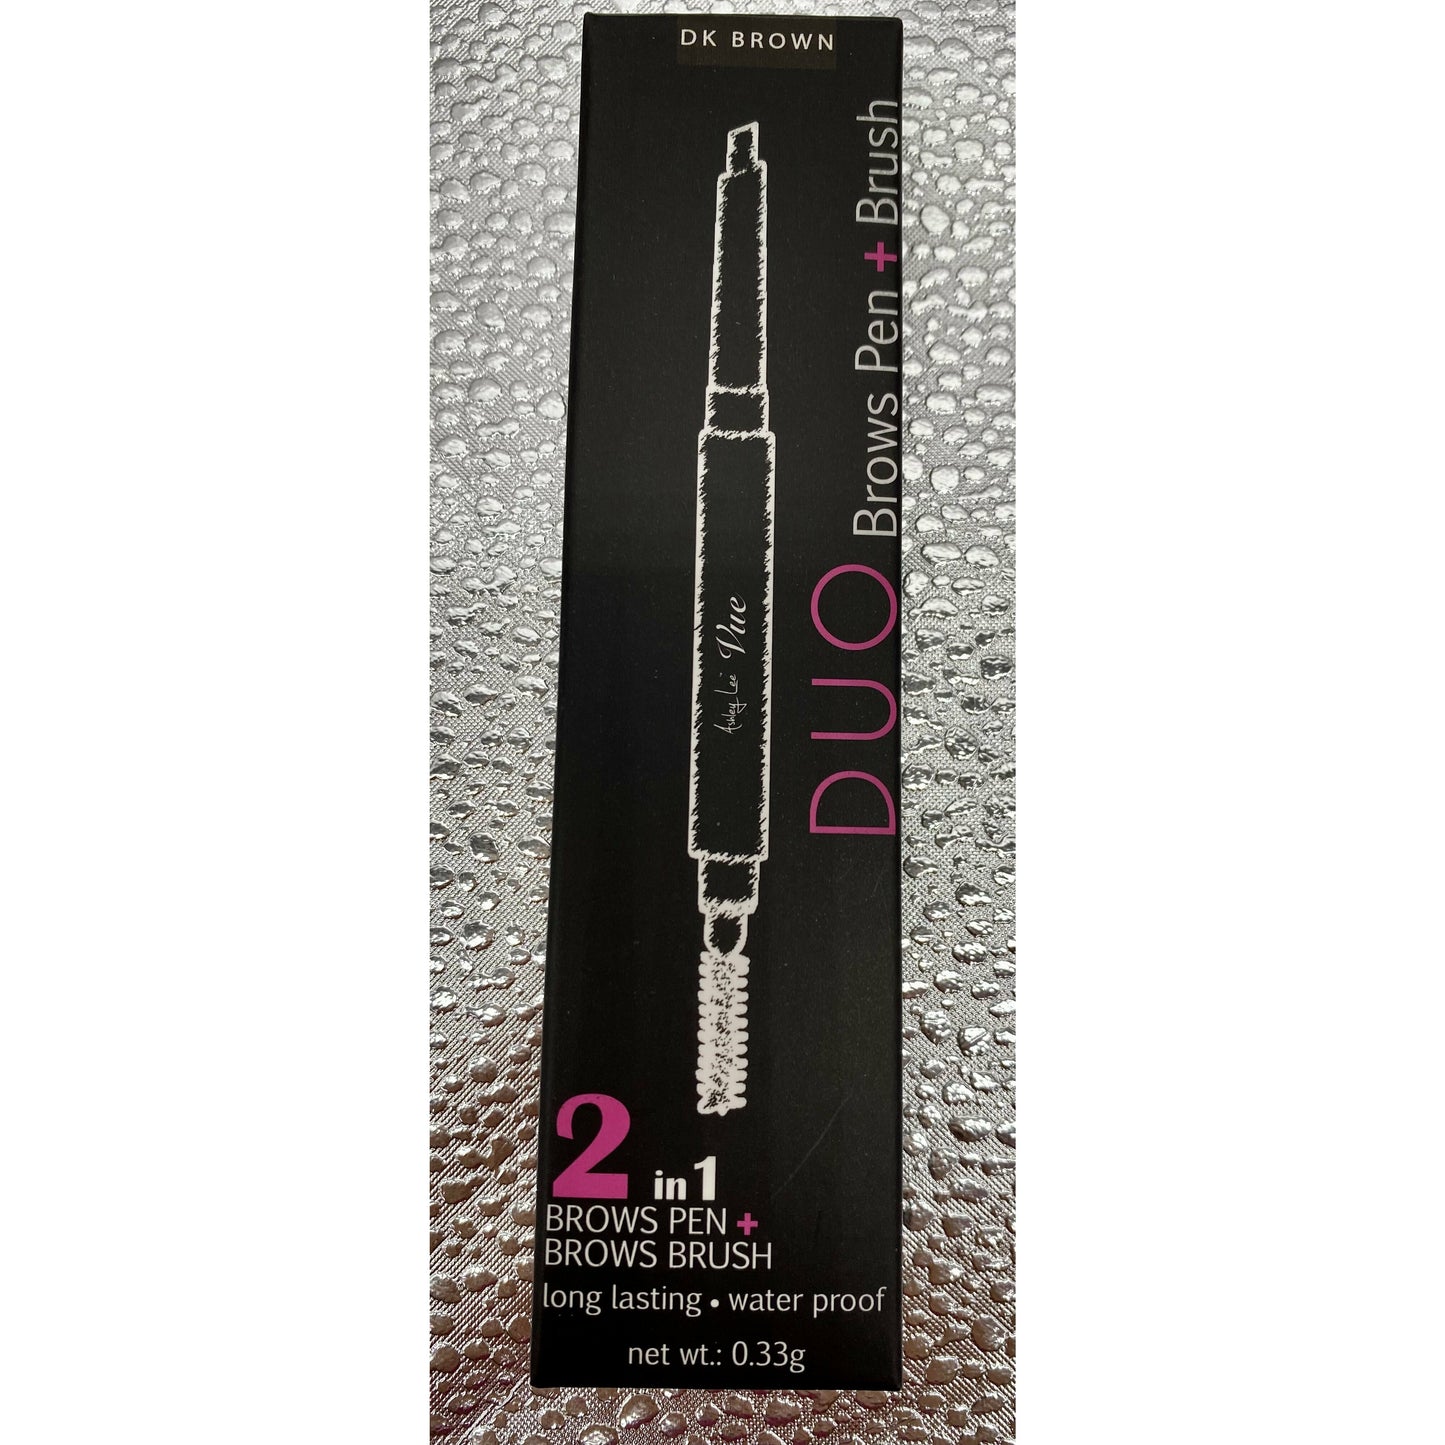 Ashley Lee Vue Duo Brows Pen + Brush - VIP Extensions